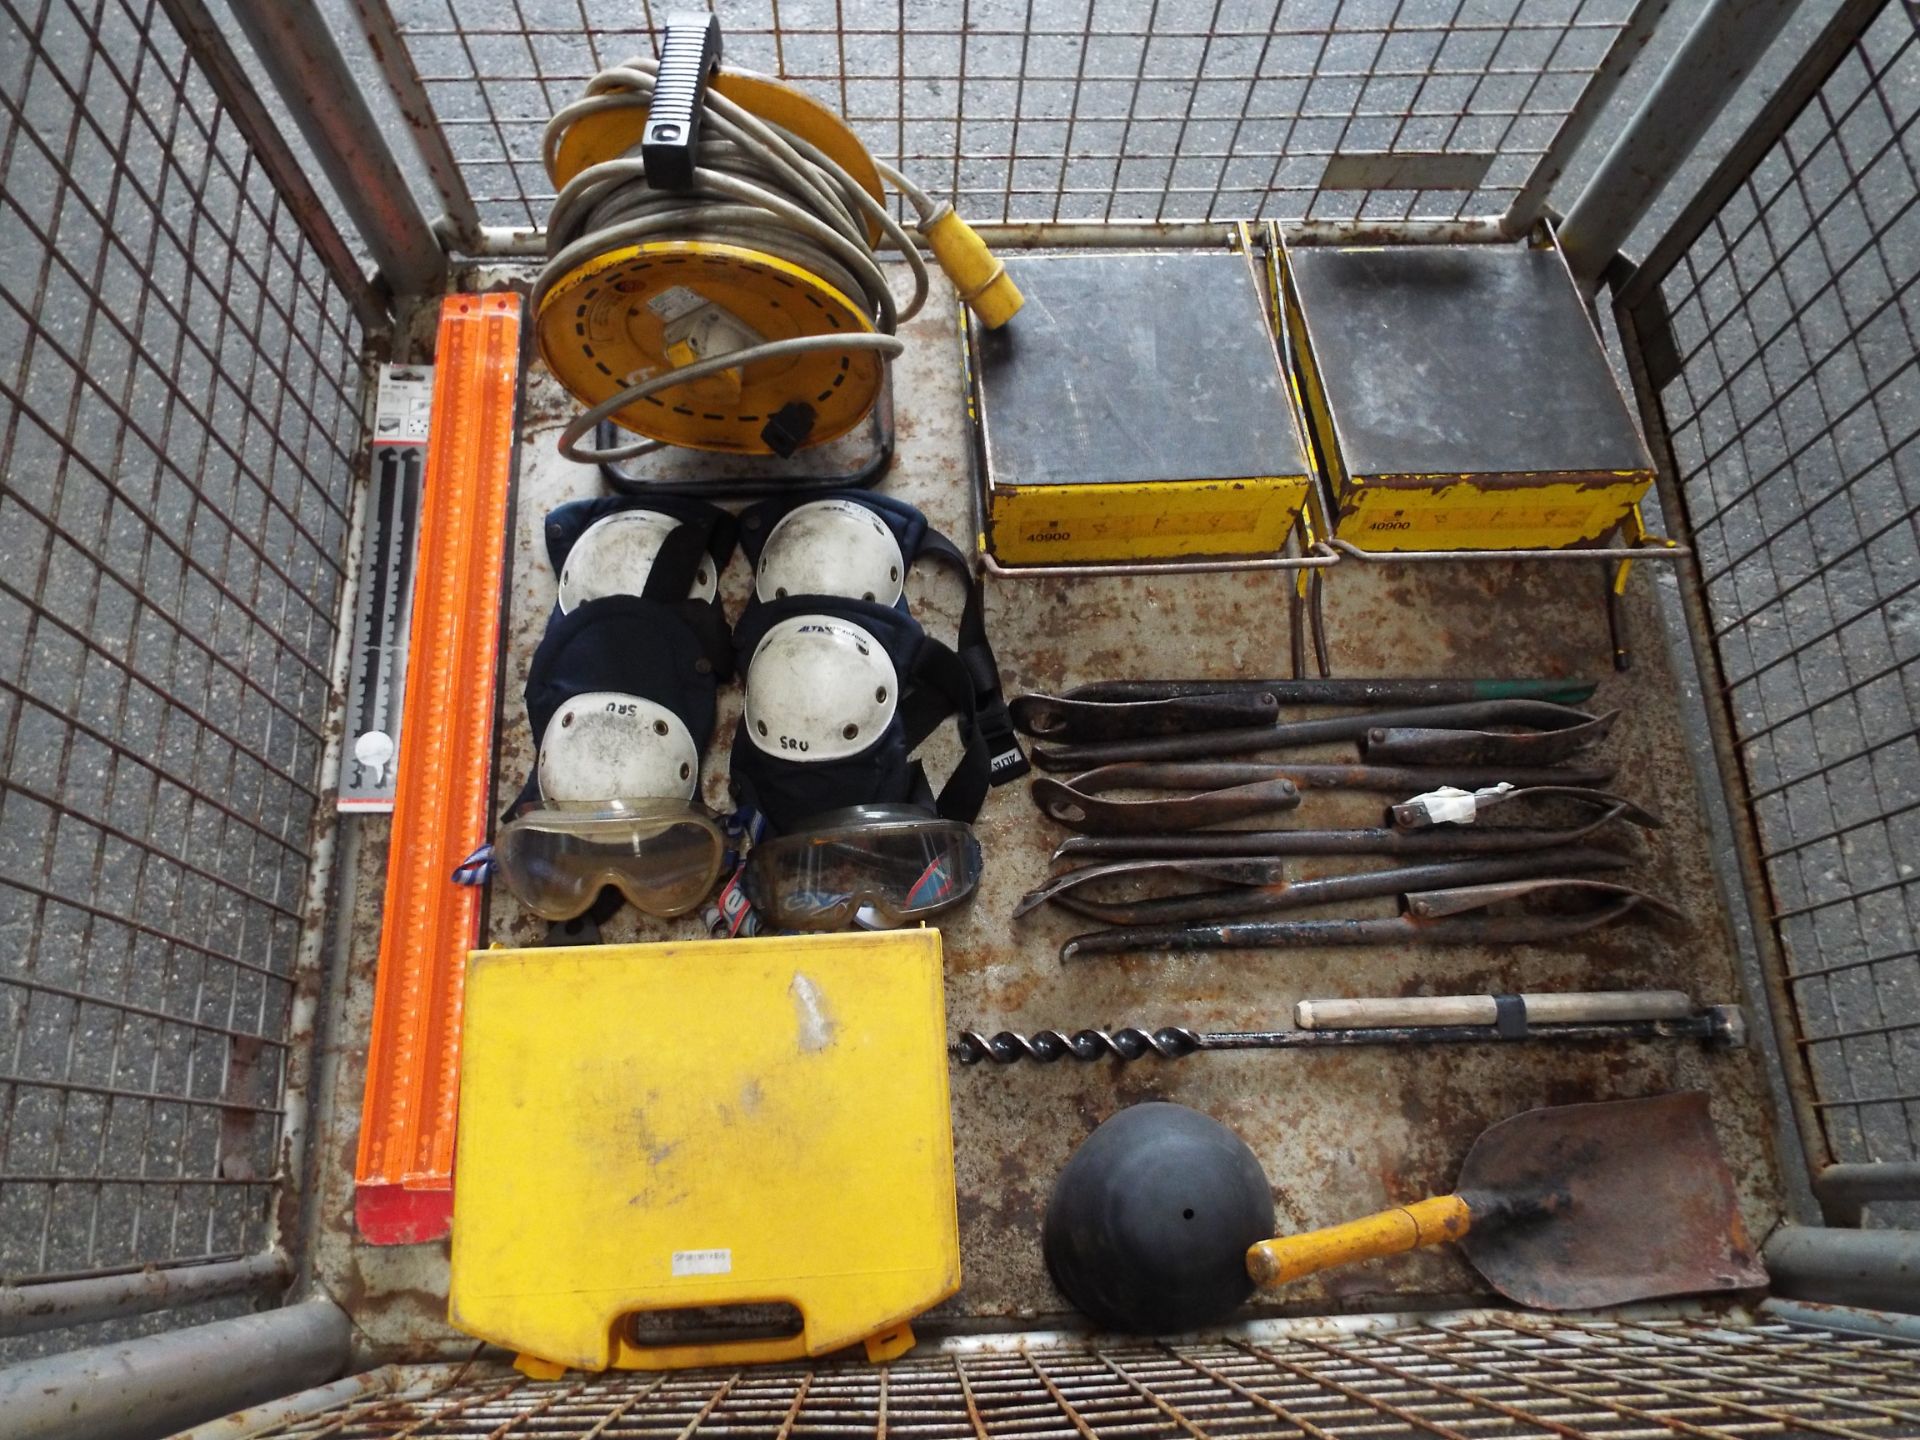 Mixed Stillage of Tools and Equipment inc. Work Platforms, Tools, Safety Equipment Cable Reel etc.